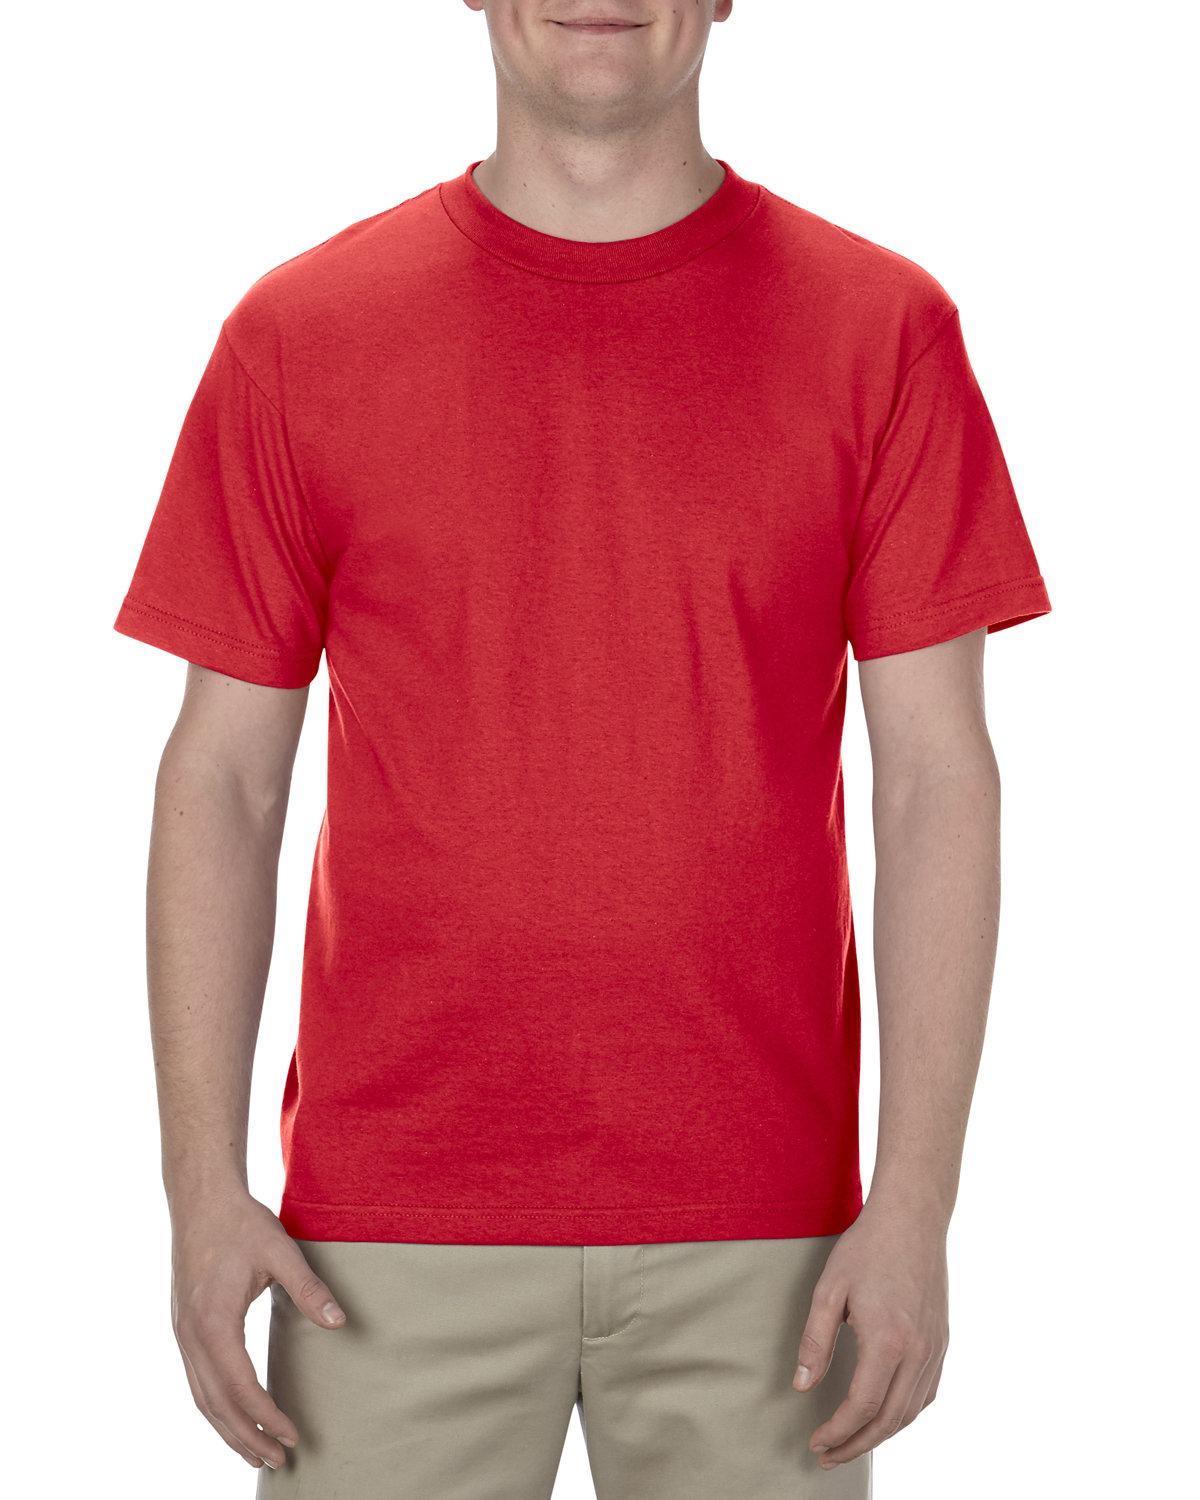 American Apparel Adult 6.0 oz., 100% Cotton T-Shirt RED 